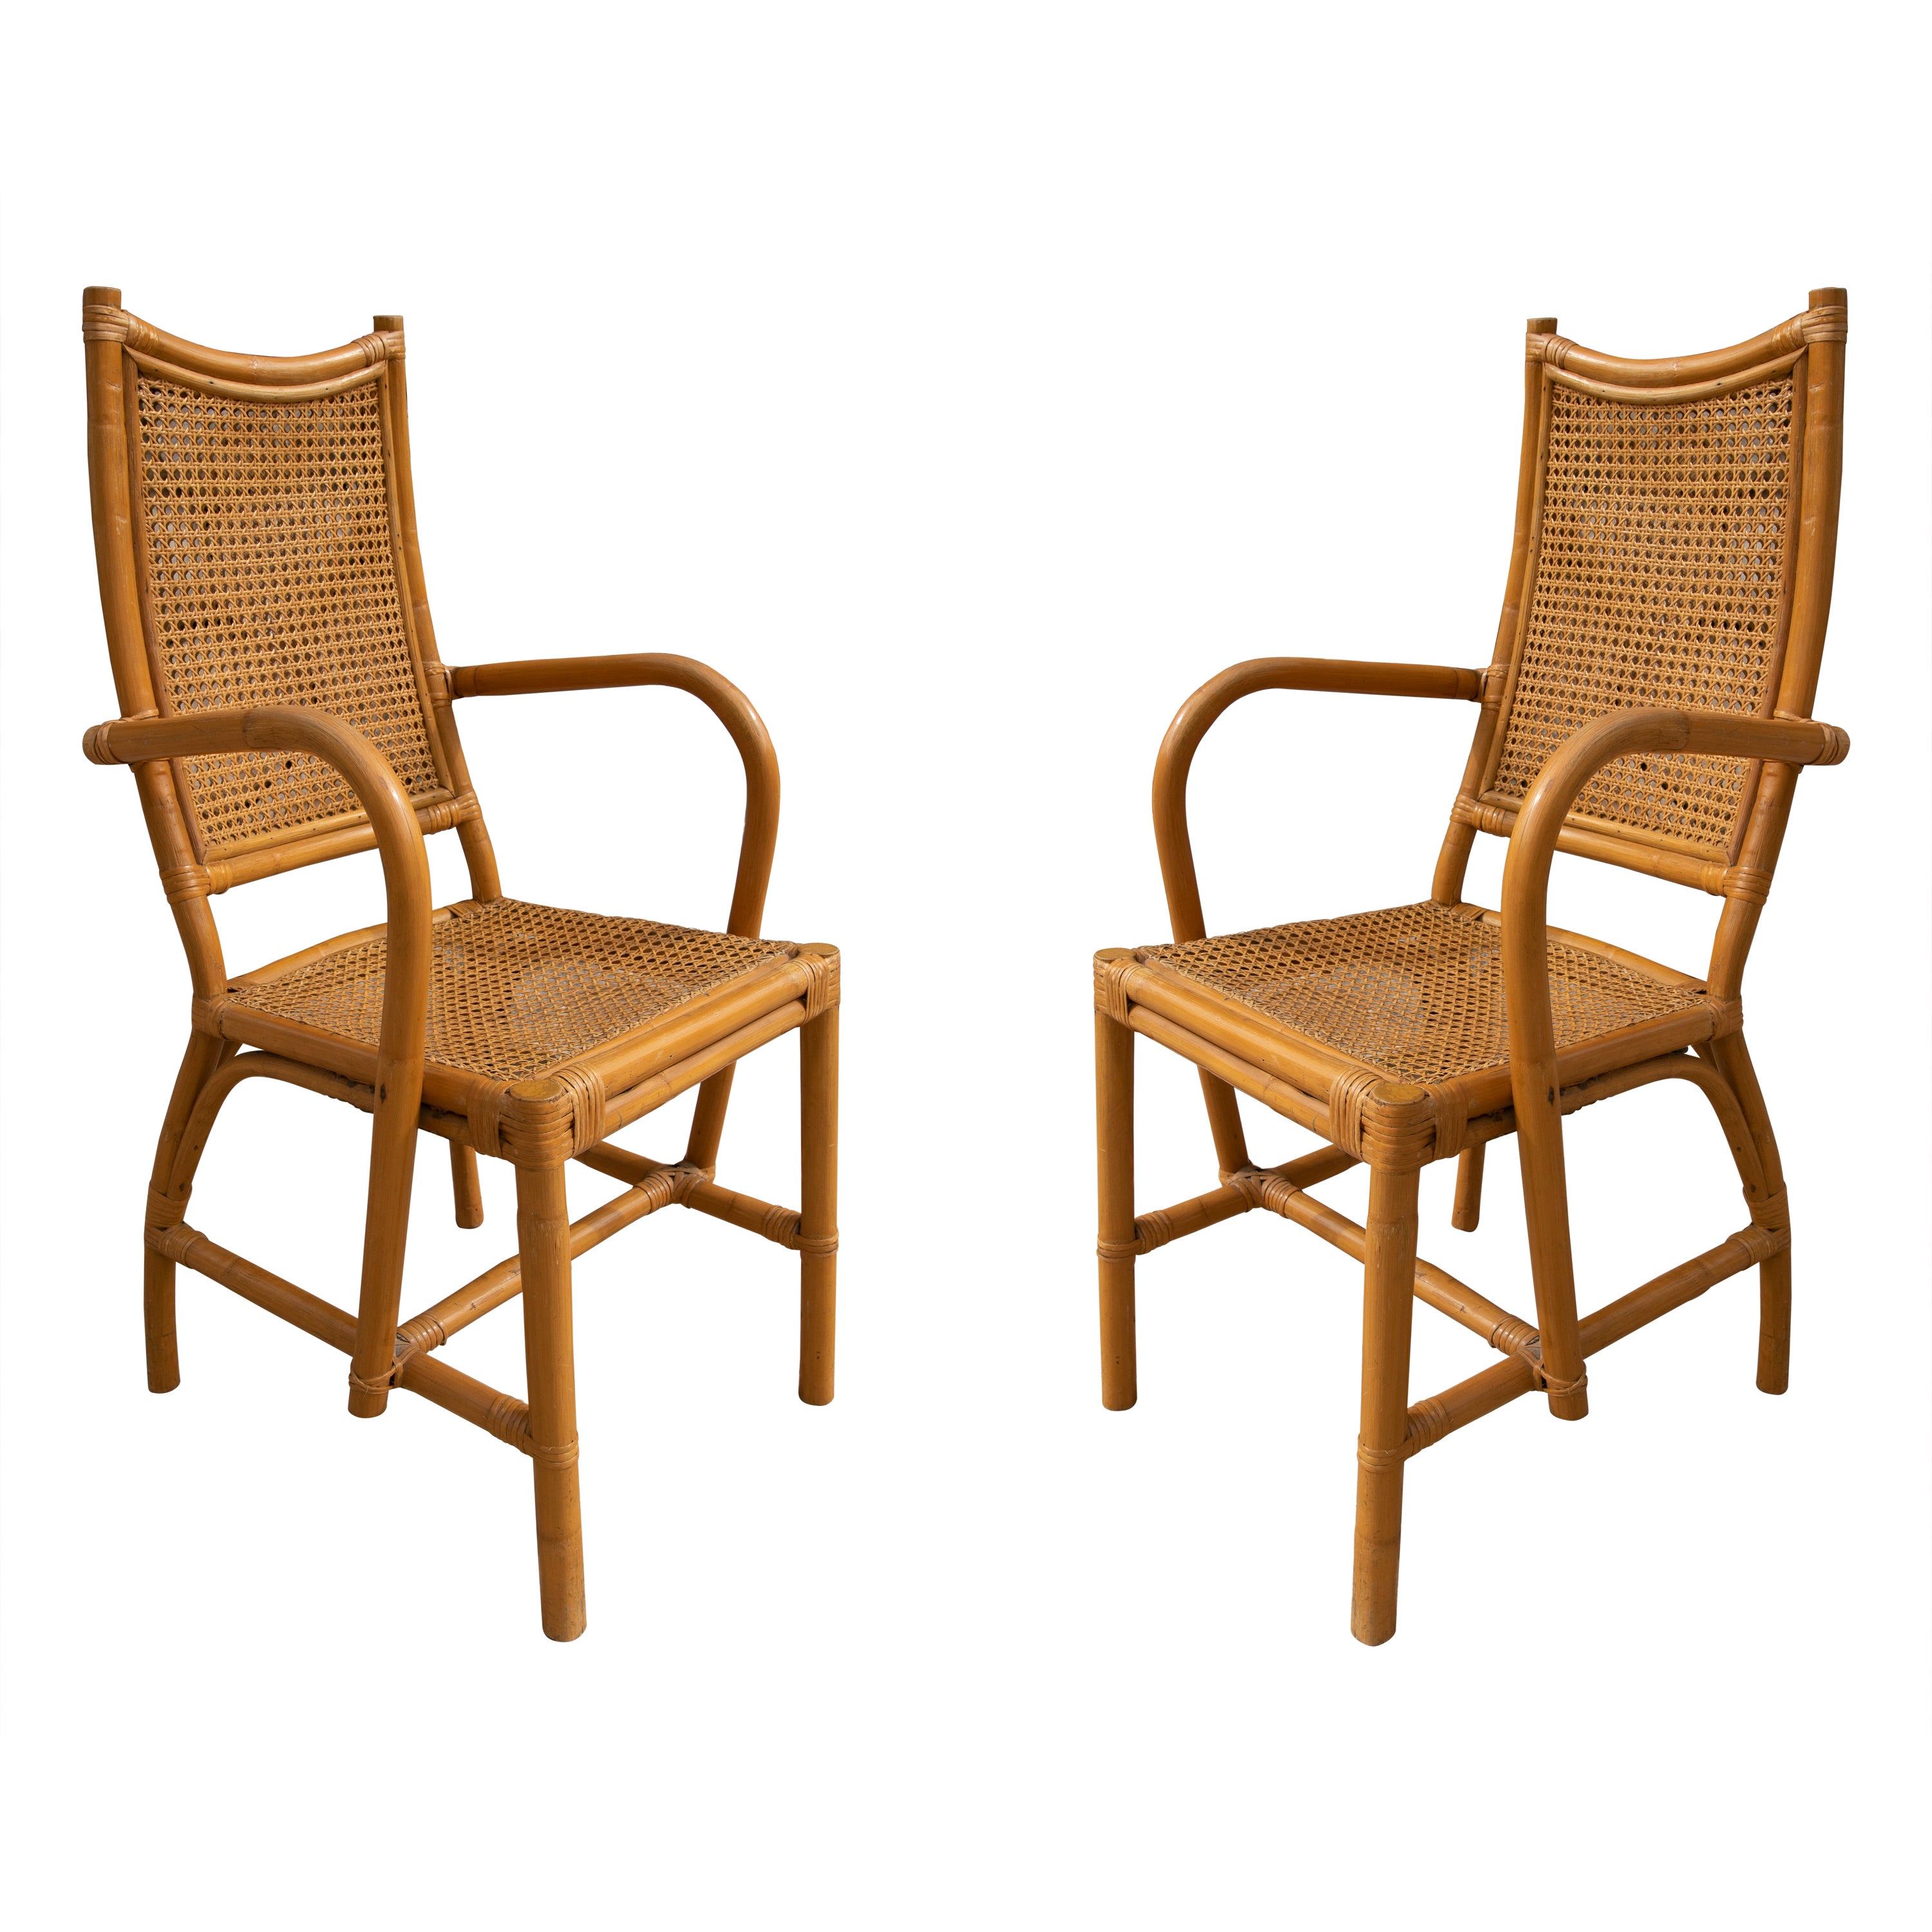 Pair of Spanish Bamboo Armchairs with Rattan Grid Seating and Backrest For Sale